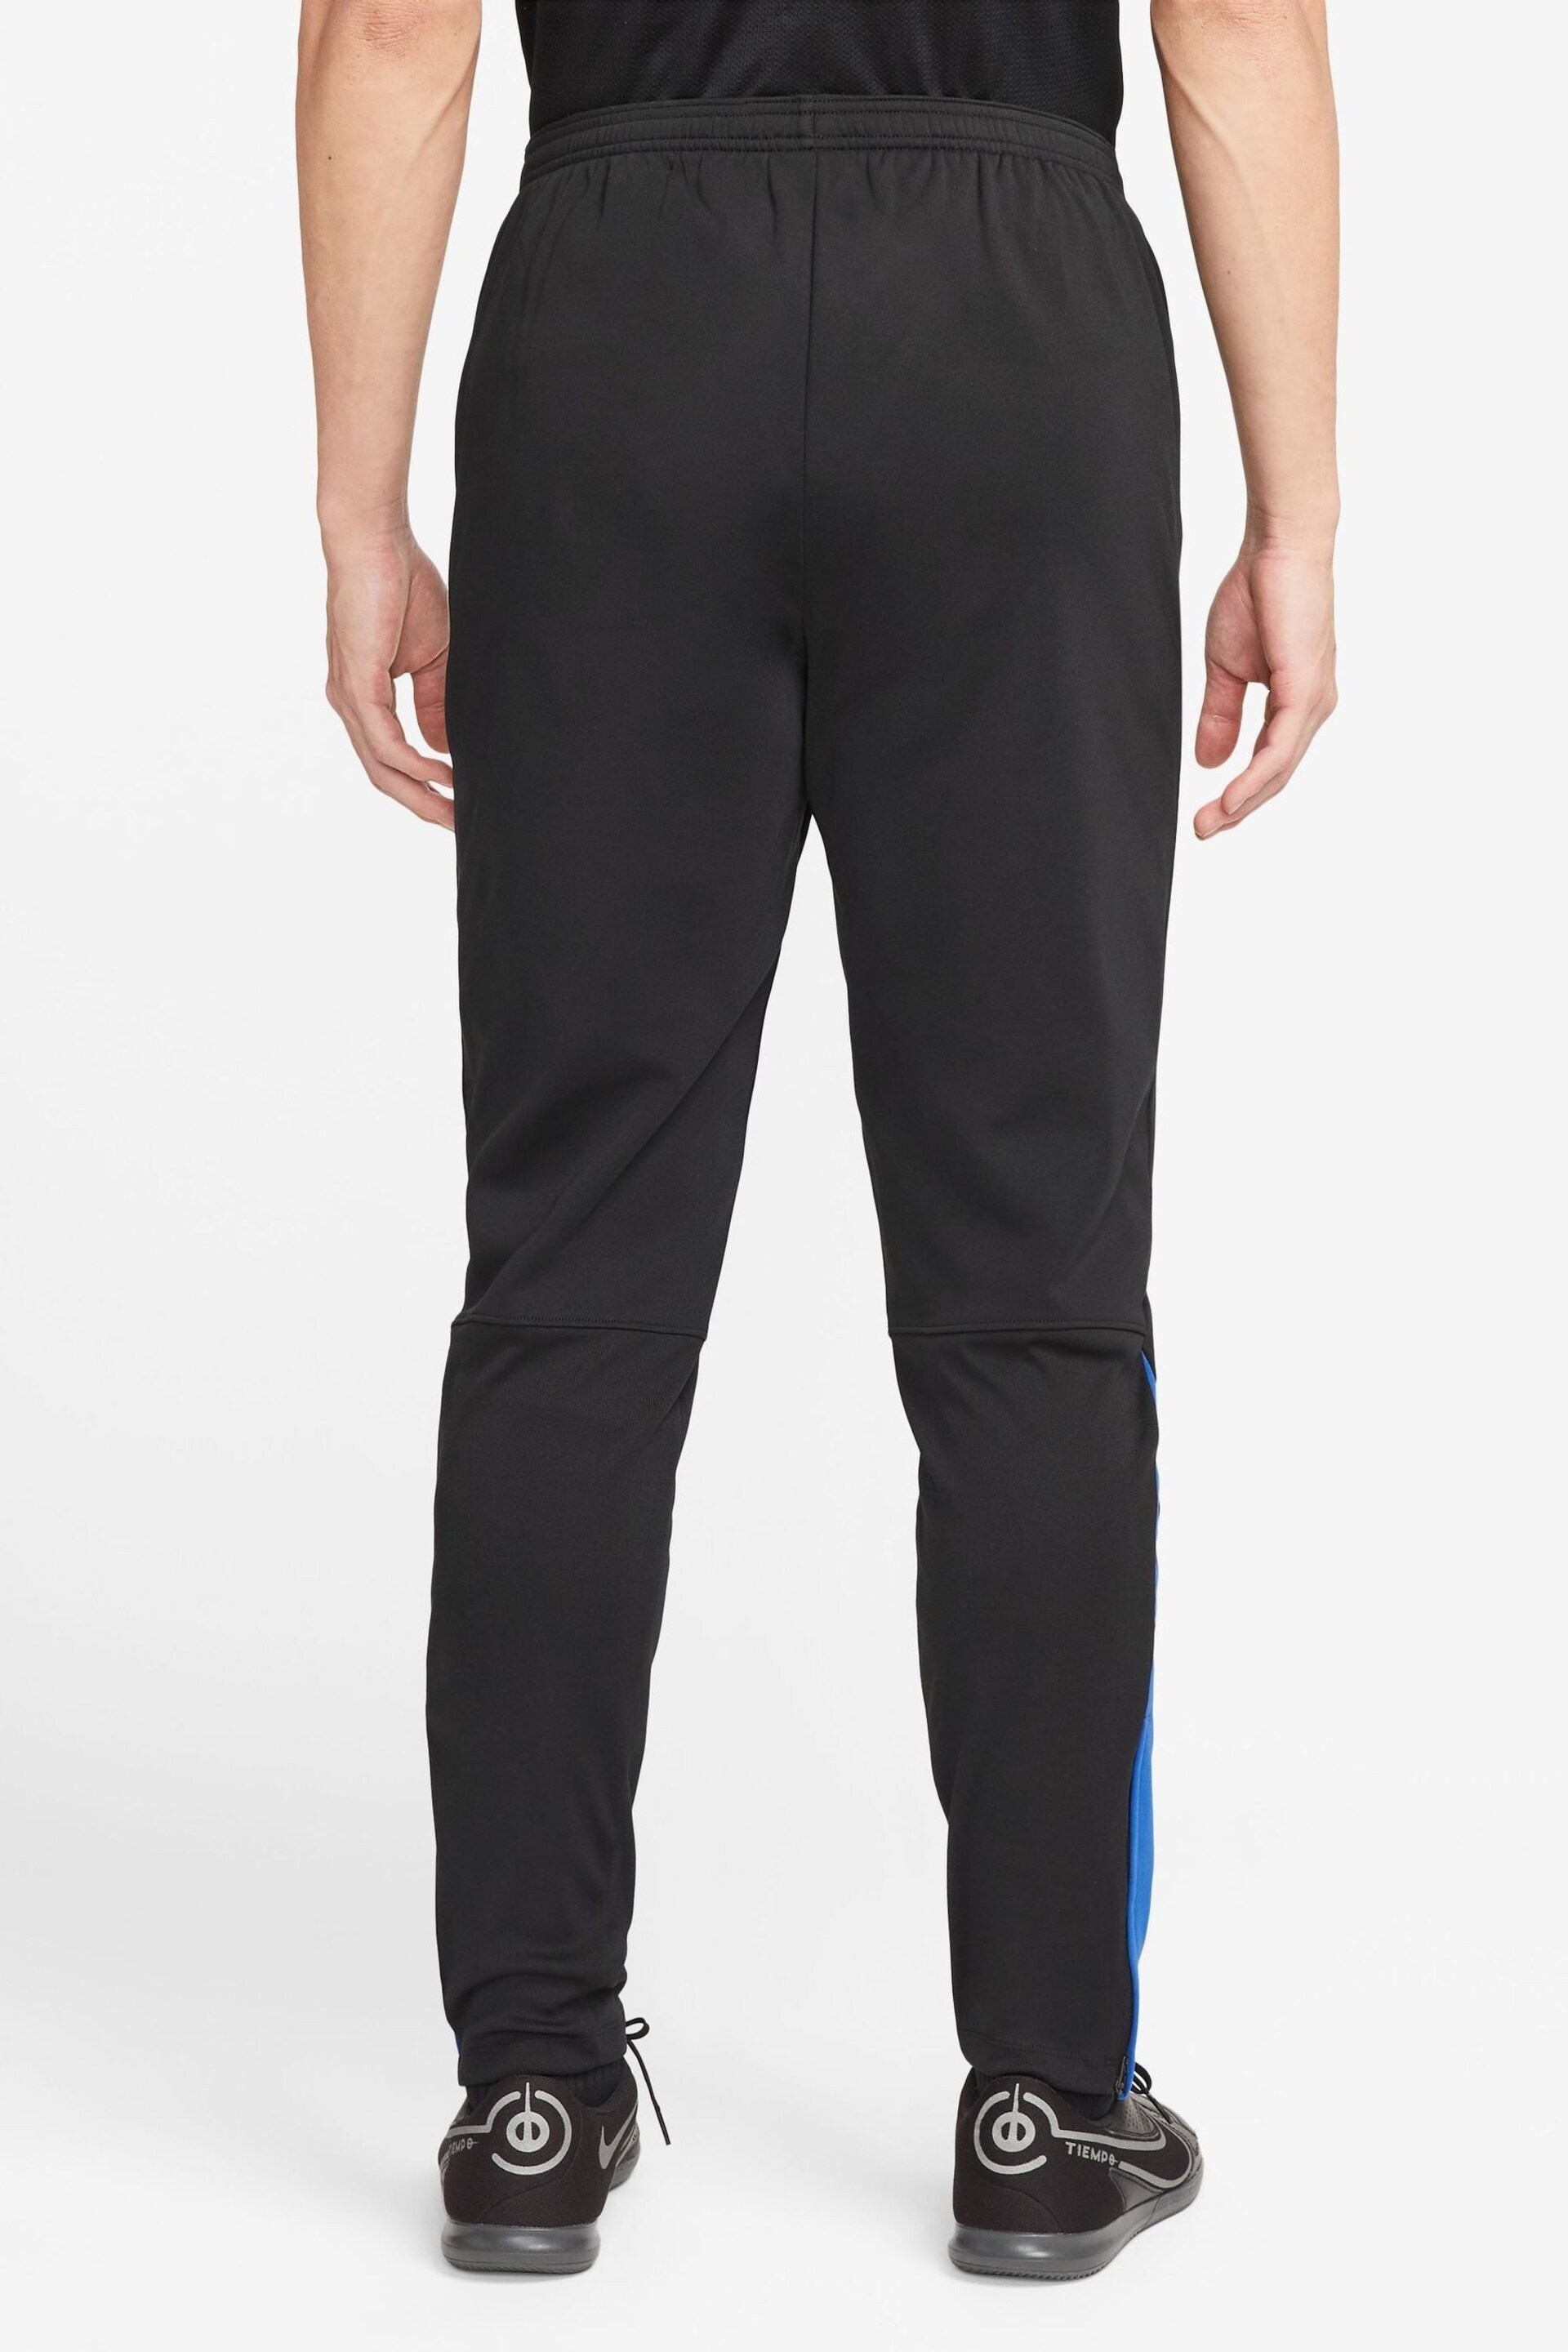 Nike Black Therma-FIT Academy Training Joggers - Image 2 of 3